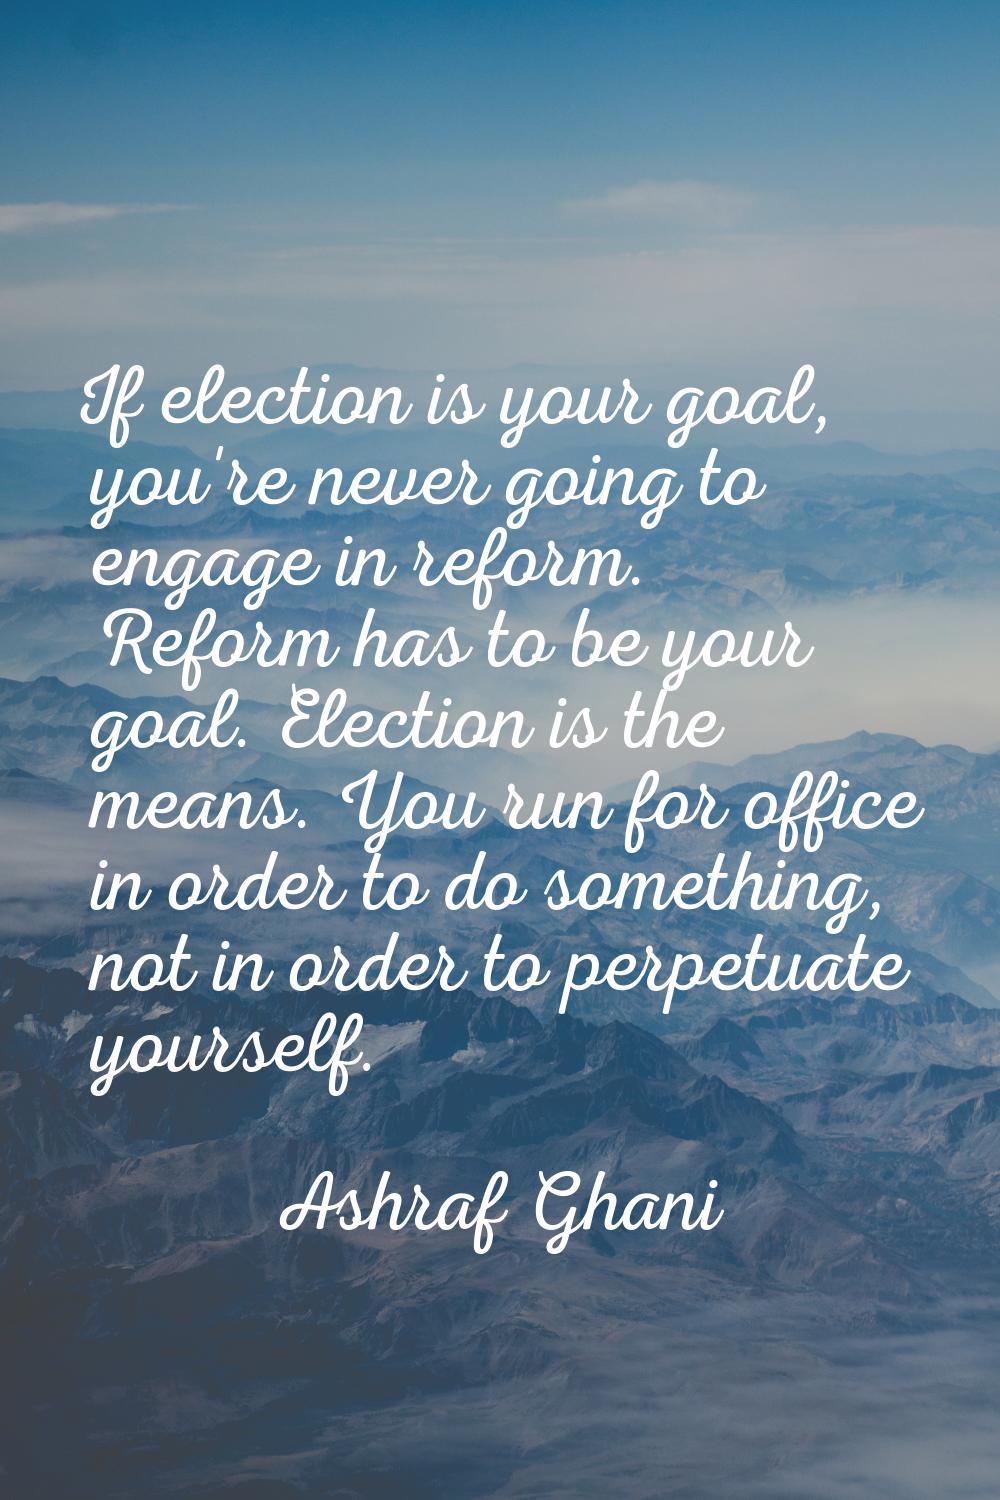 If election is your goal, you're never going to engage in reform. Reform has to be your goal. Elect